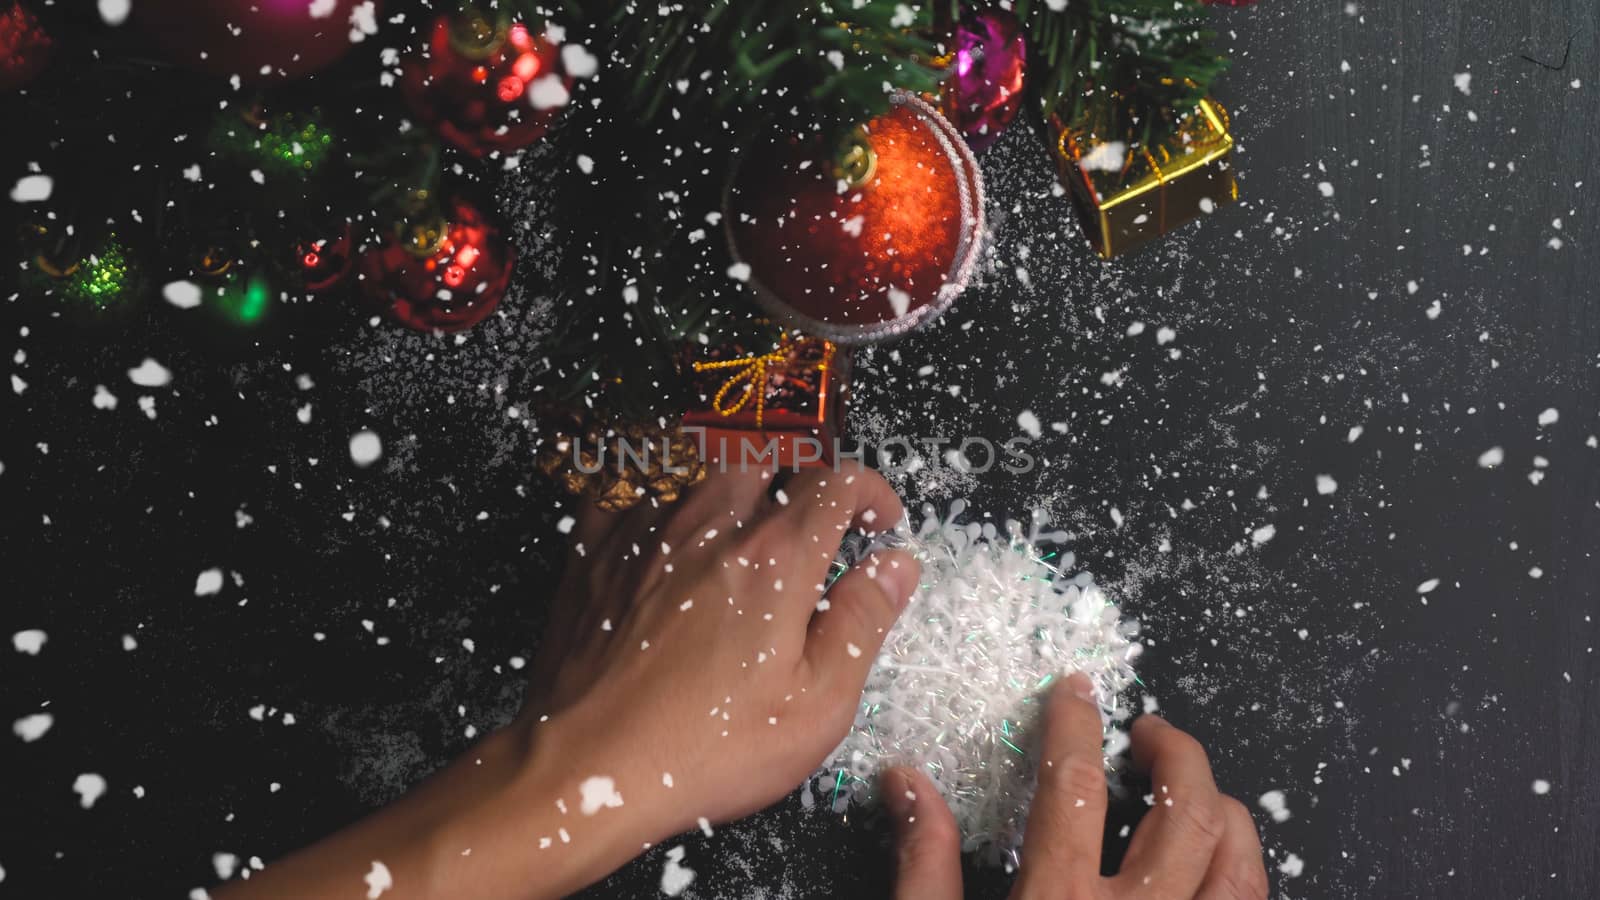 Greeting Season concept.hand setting of ornaments on a Christmas by everythingpossible